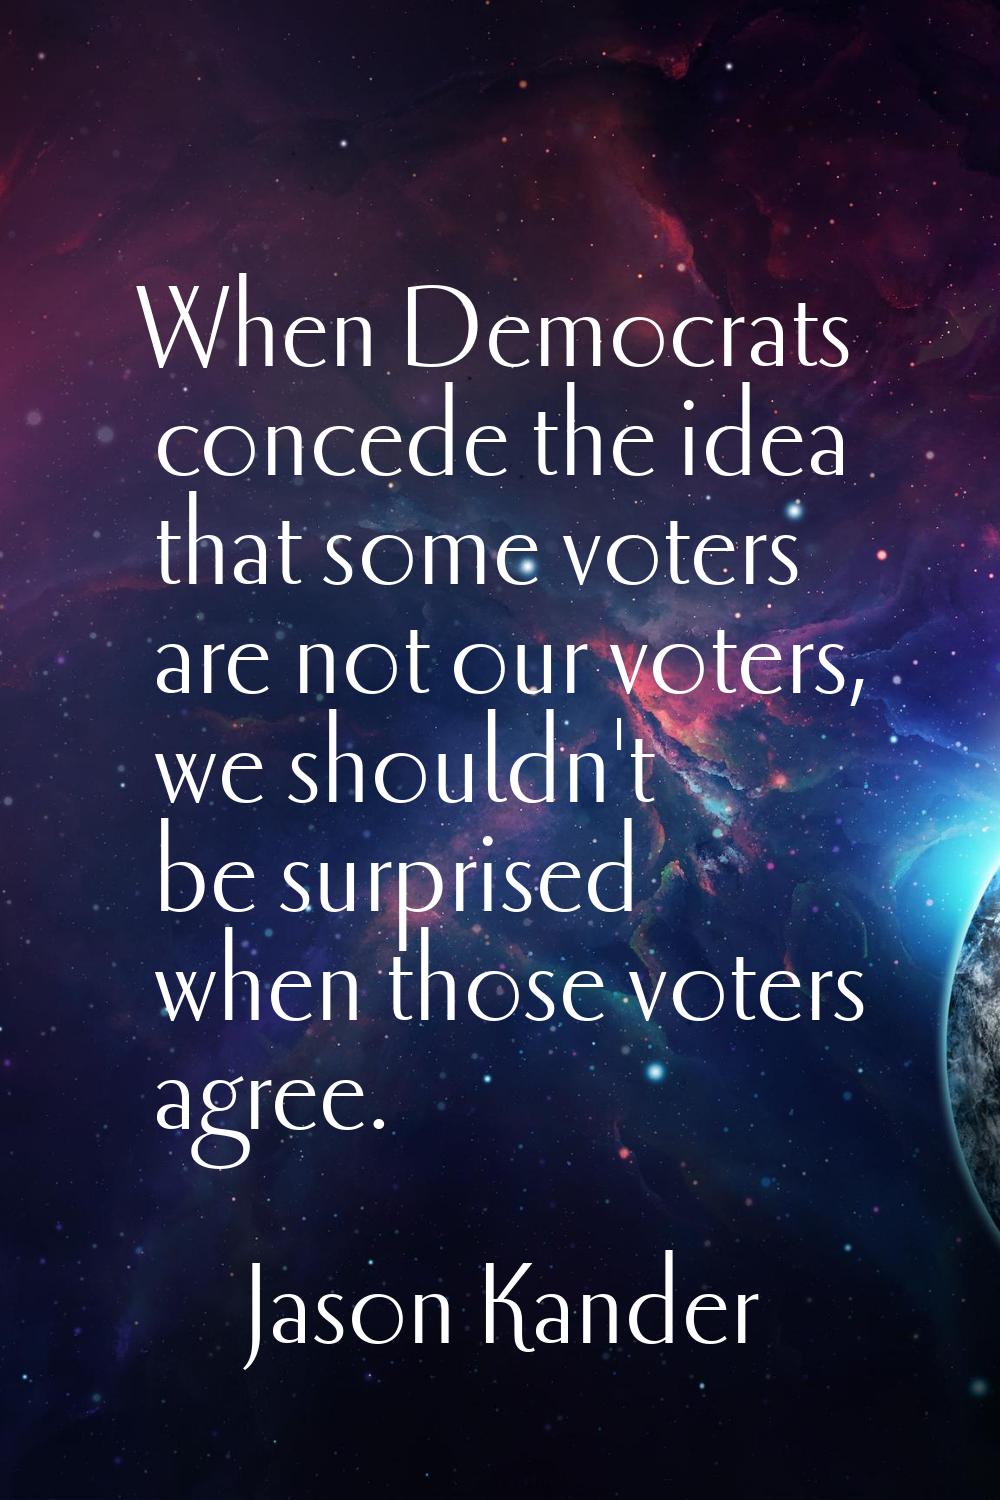 When Democrats concede the idea that some voters are not our voters, we shouldn't be surprised when